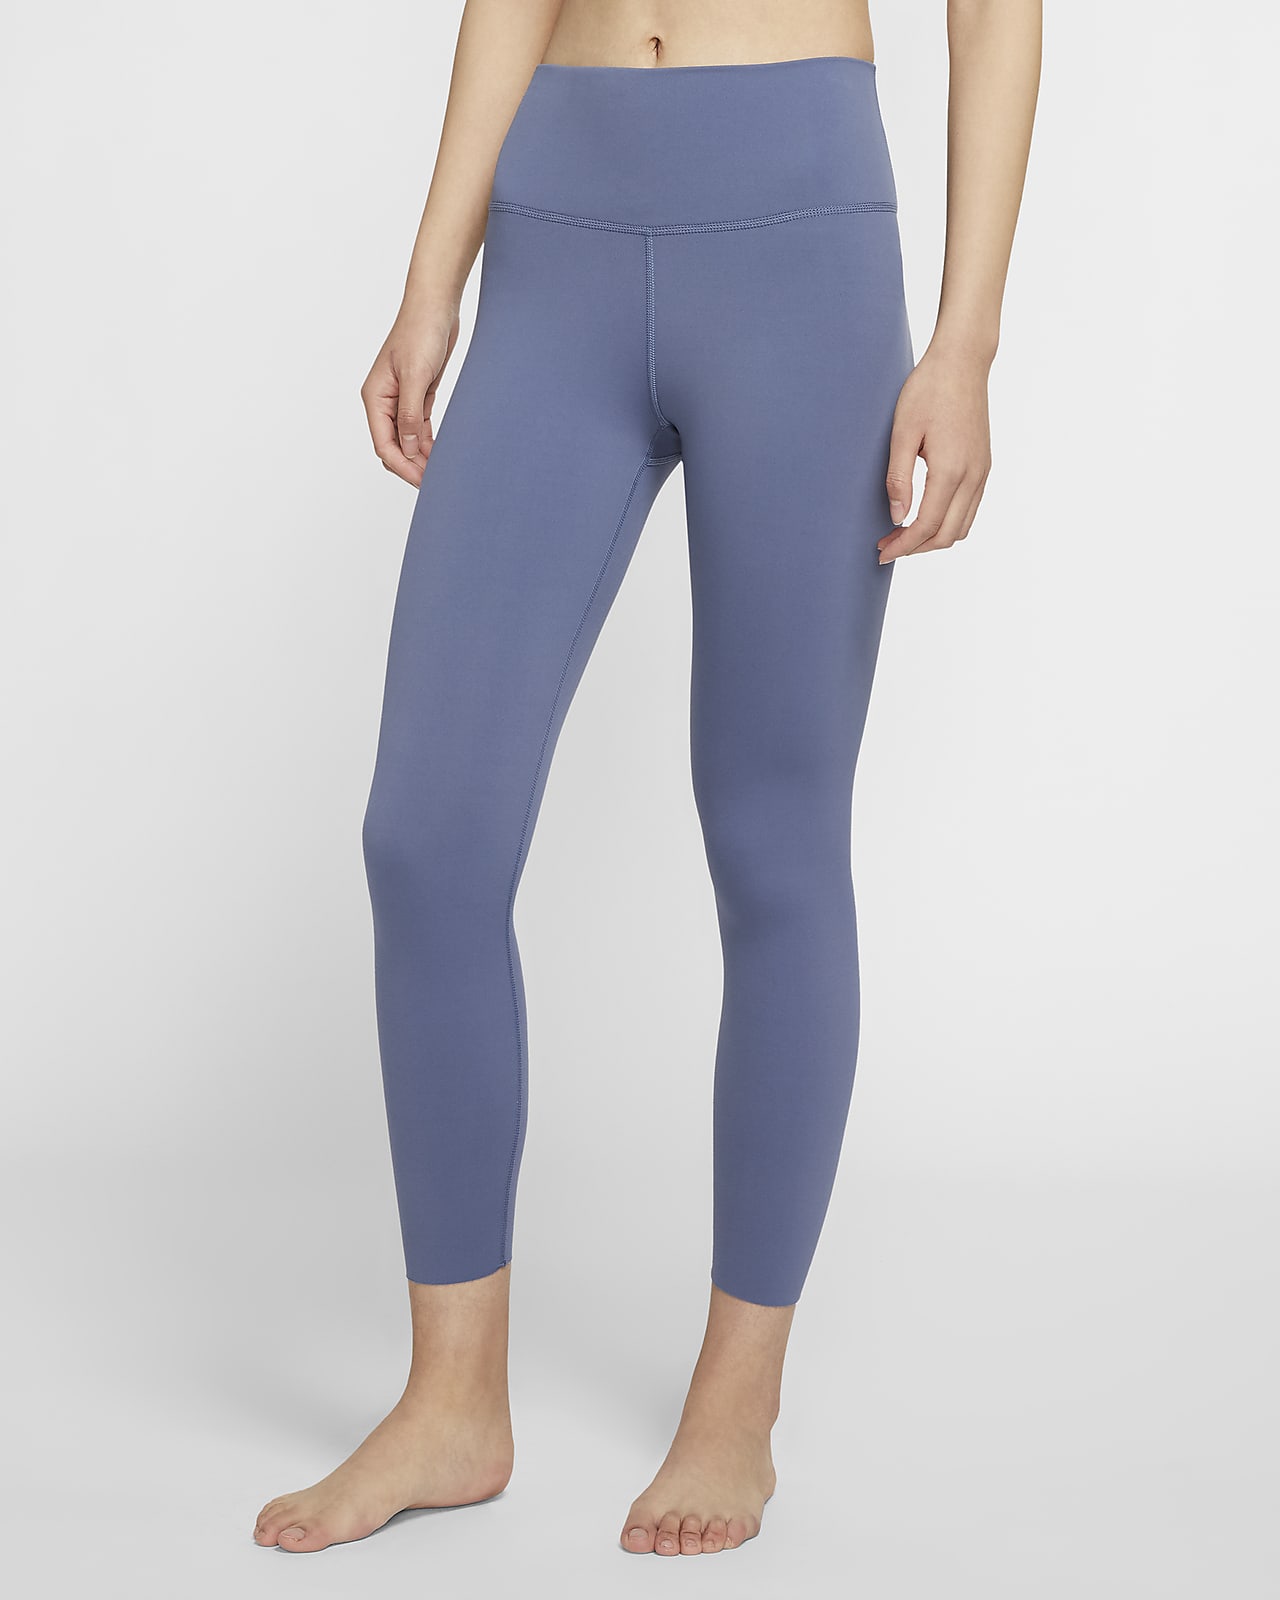 Yogalicious - Women's Fleece Lined Hi Rise Flare Yoga Pant With